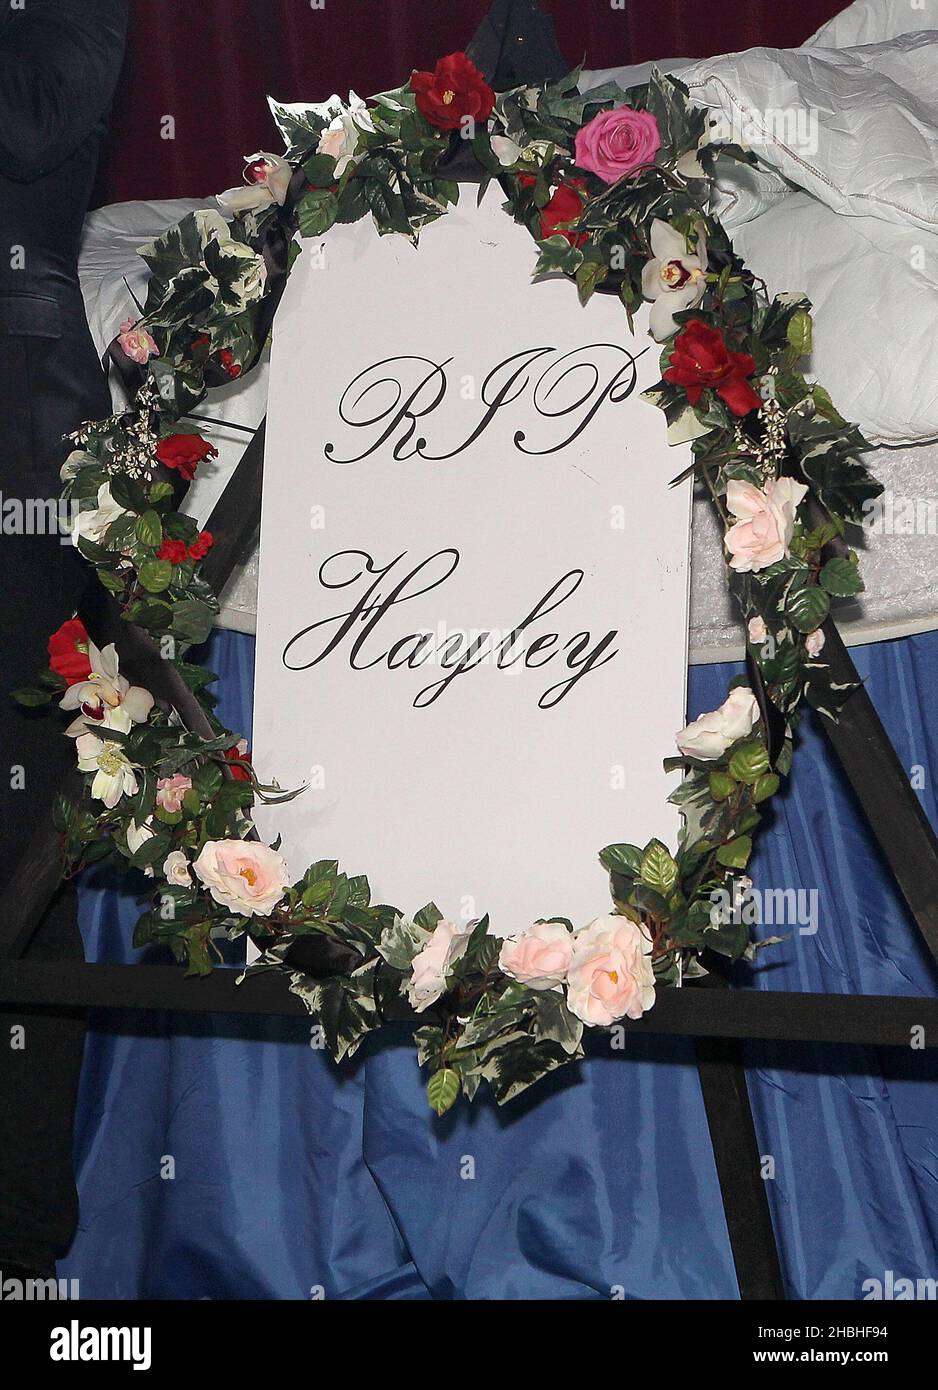 RIP Sign on Bed at the Hayley Cropper Memorial at G-A-Y Heaven in London. Stock Photo